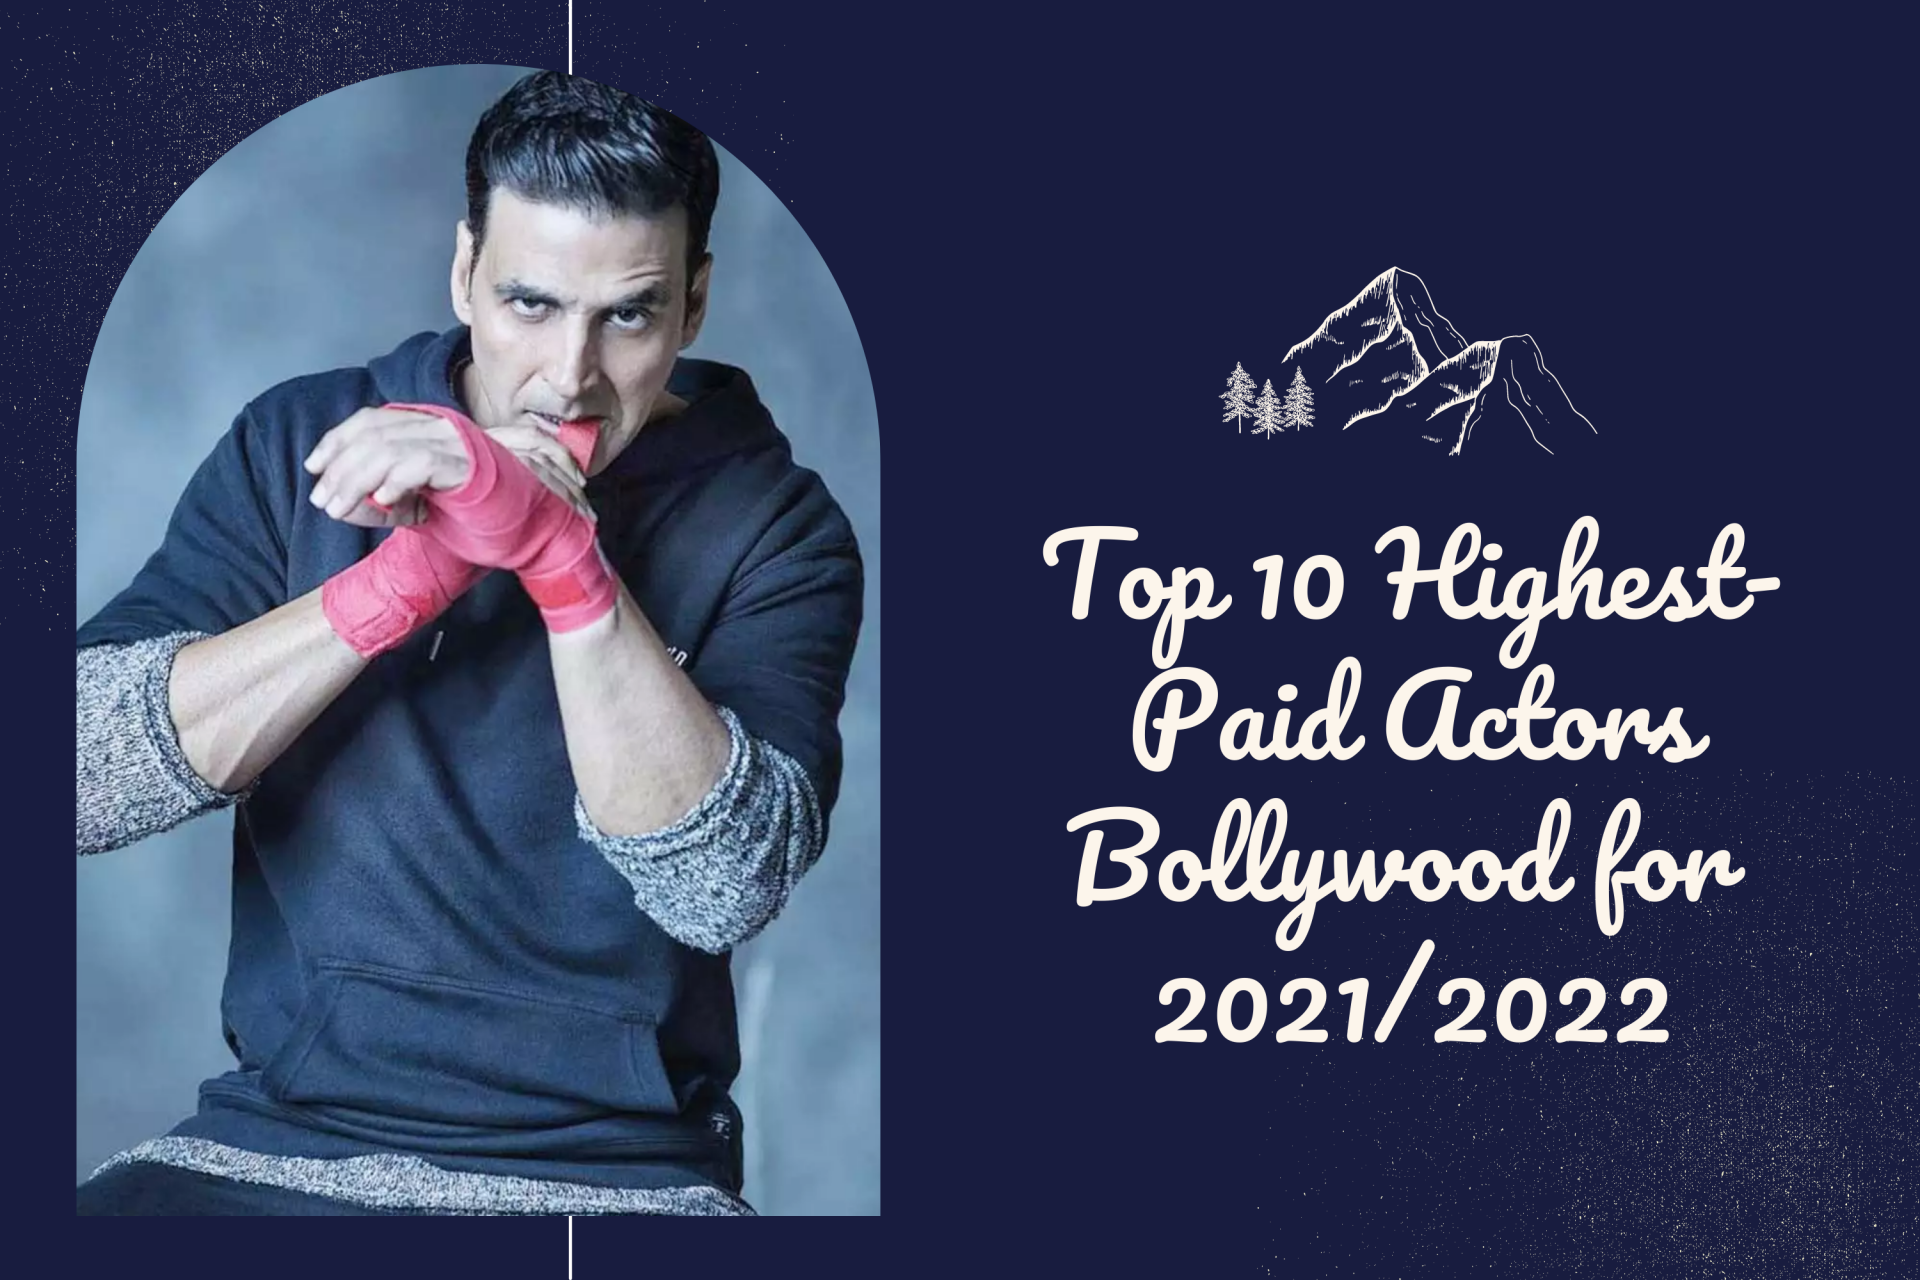 Top 10 Highest-Paid Actors in Bollywood 2022/2023